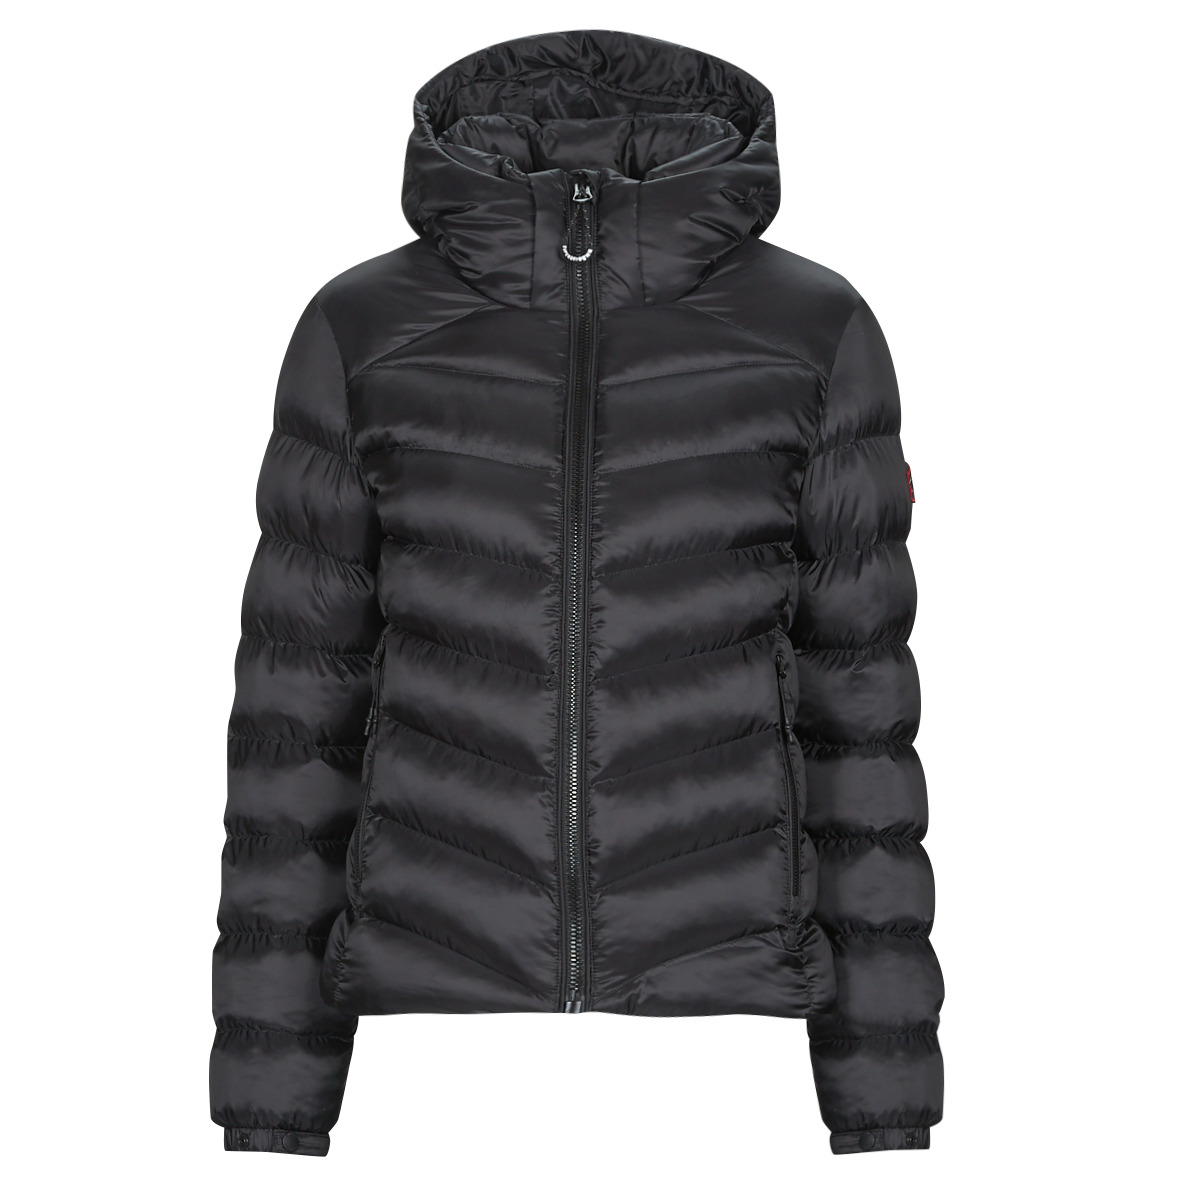 | NET FUJI Superdry Women Clothing Duffel JACKET - coats PADDED HOODED delivery - Free Spartoo Black !